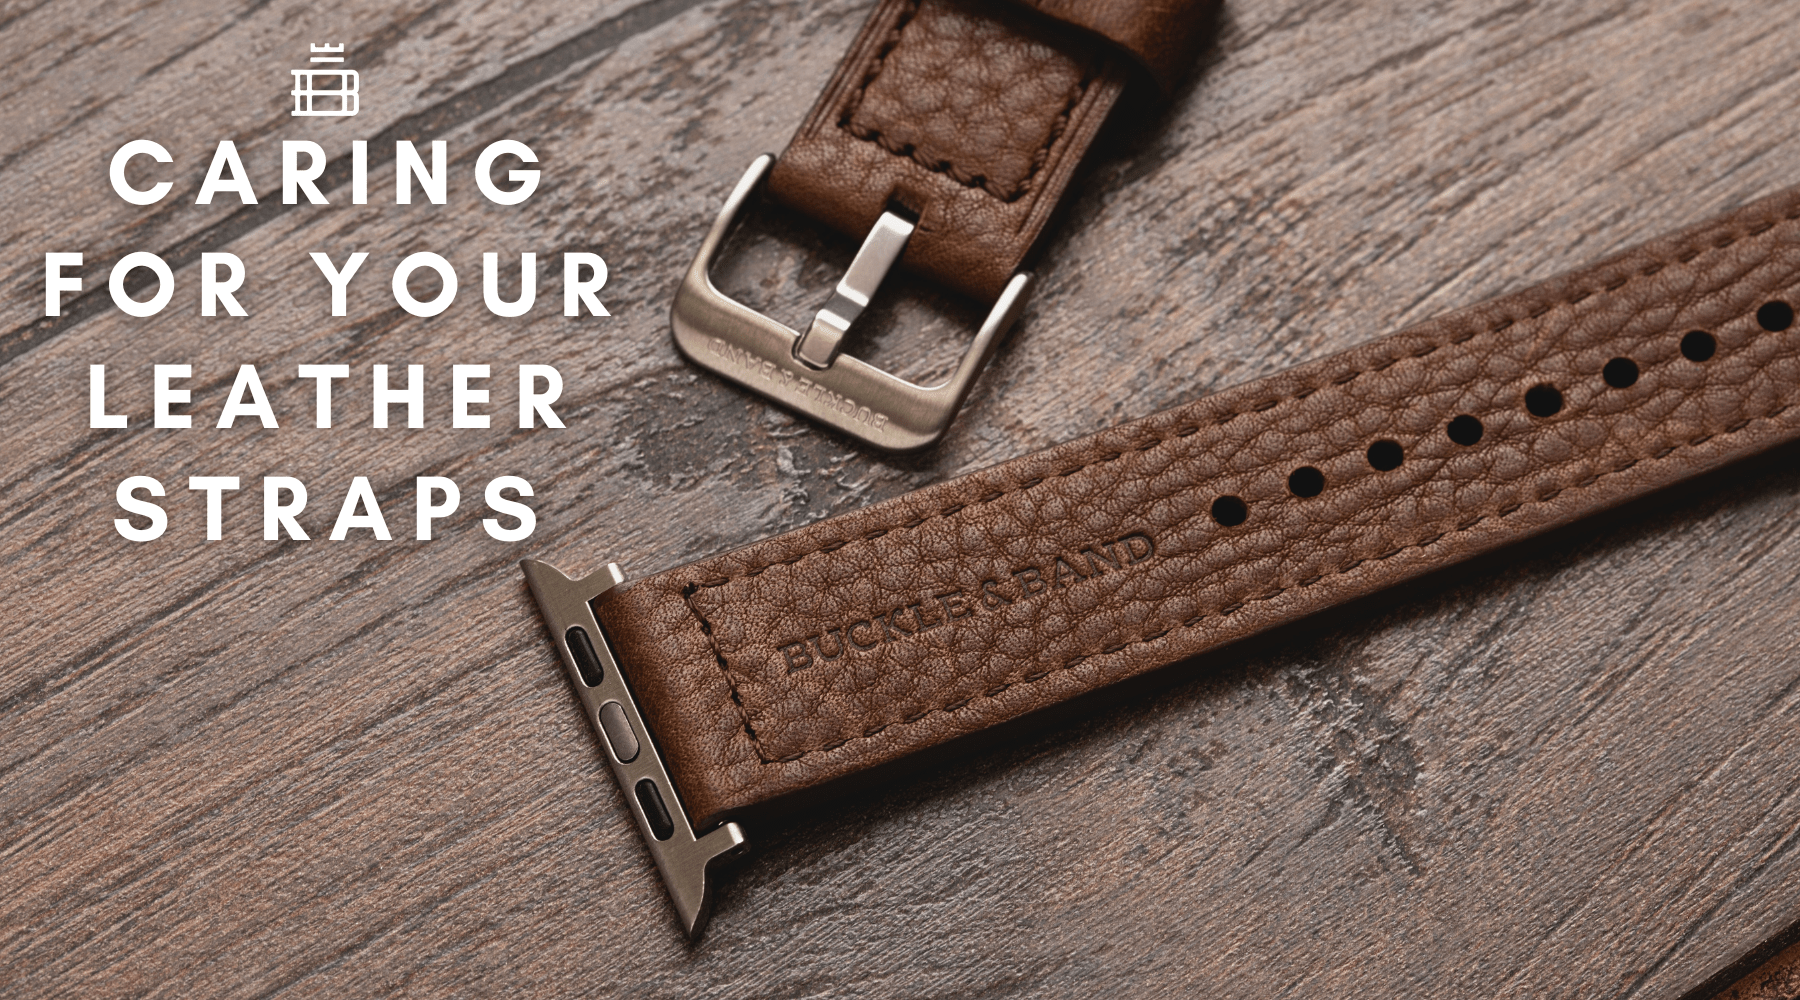 How to Care for Leather Straps